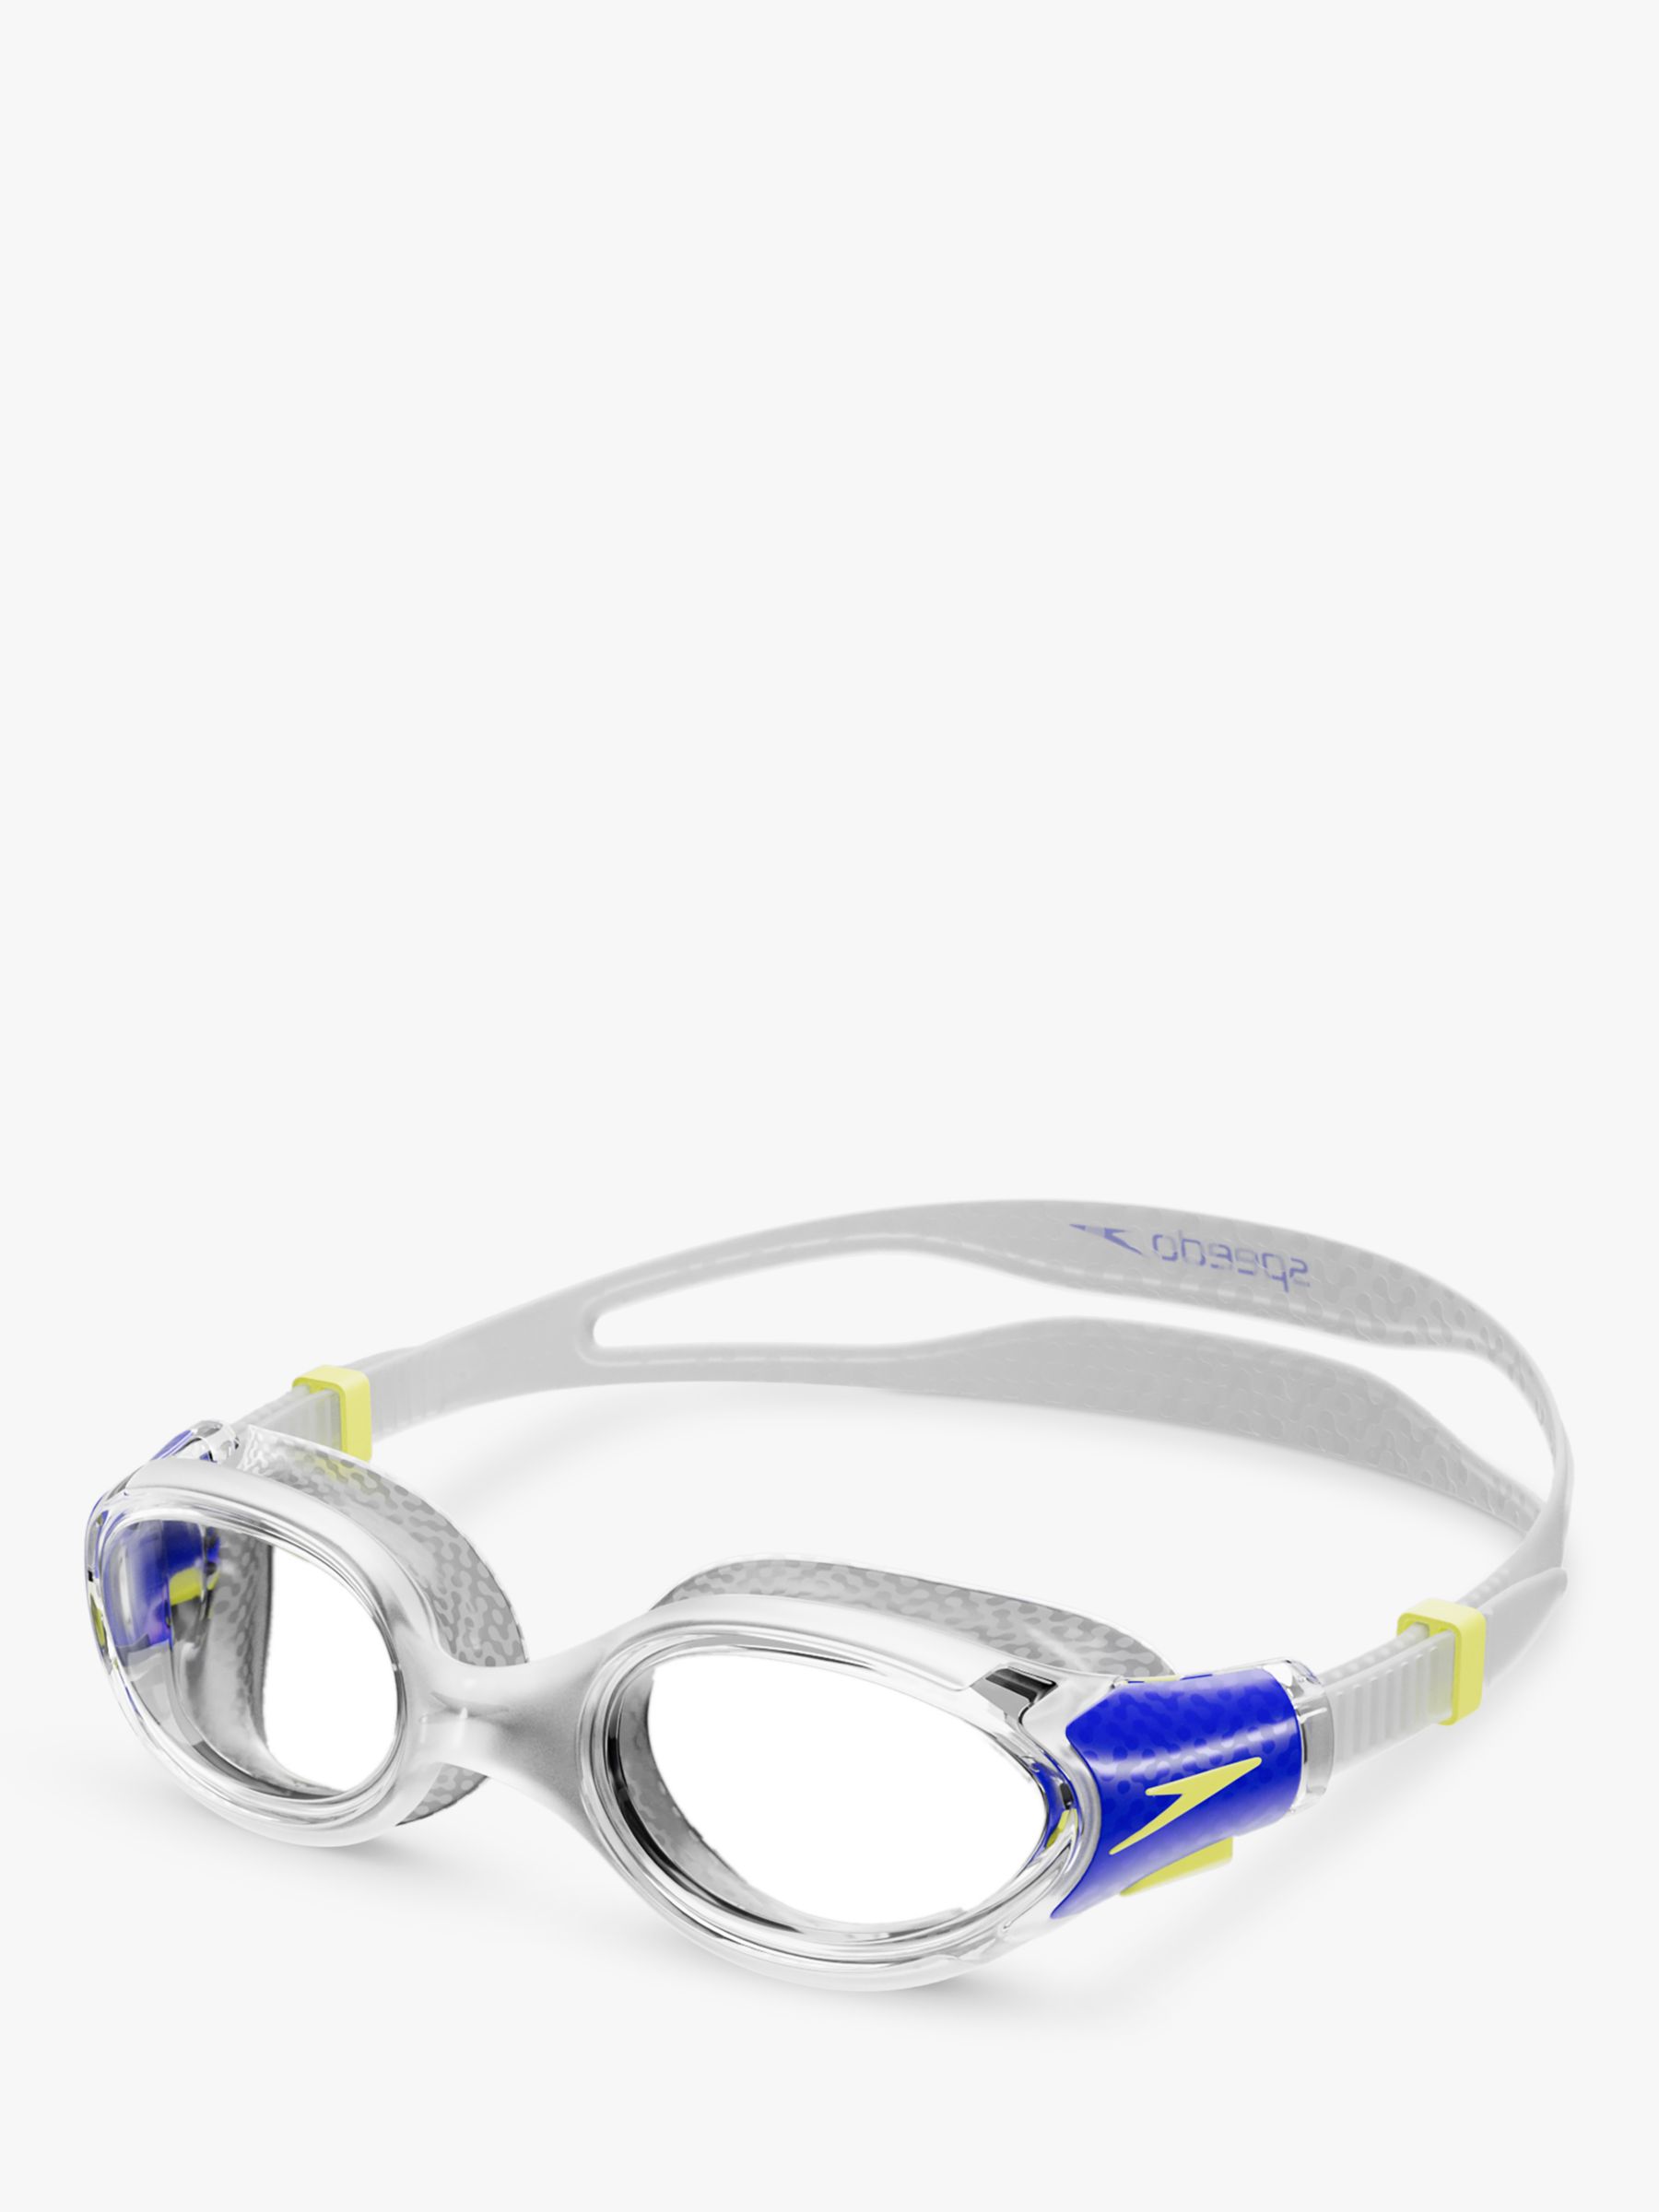 Buy Speedo Junior Biofuse 2.0 Swimming Goggles, Clear Online at johnlewis.com